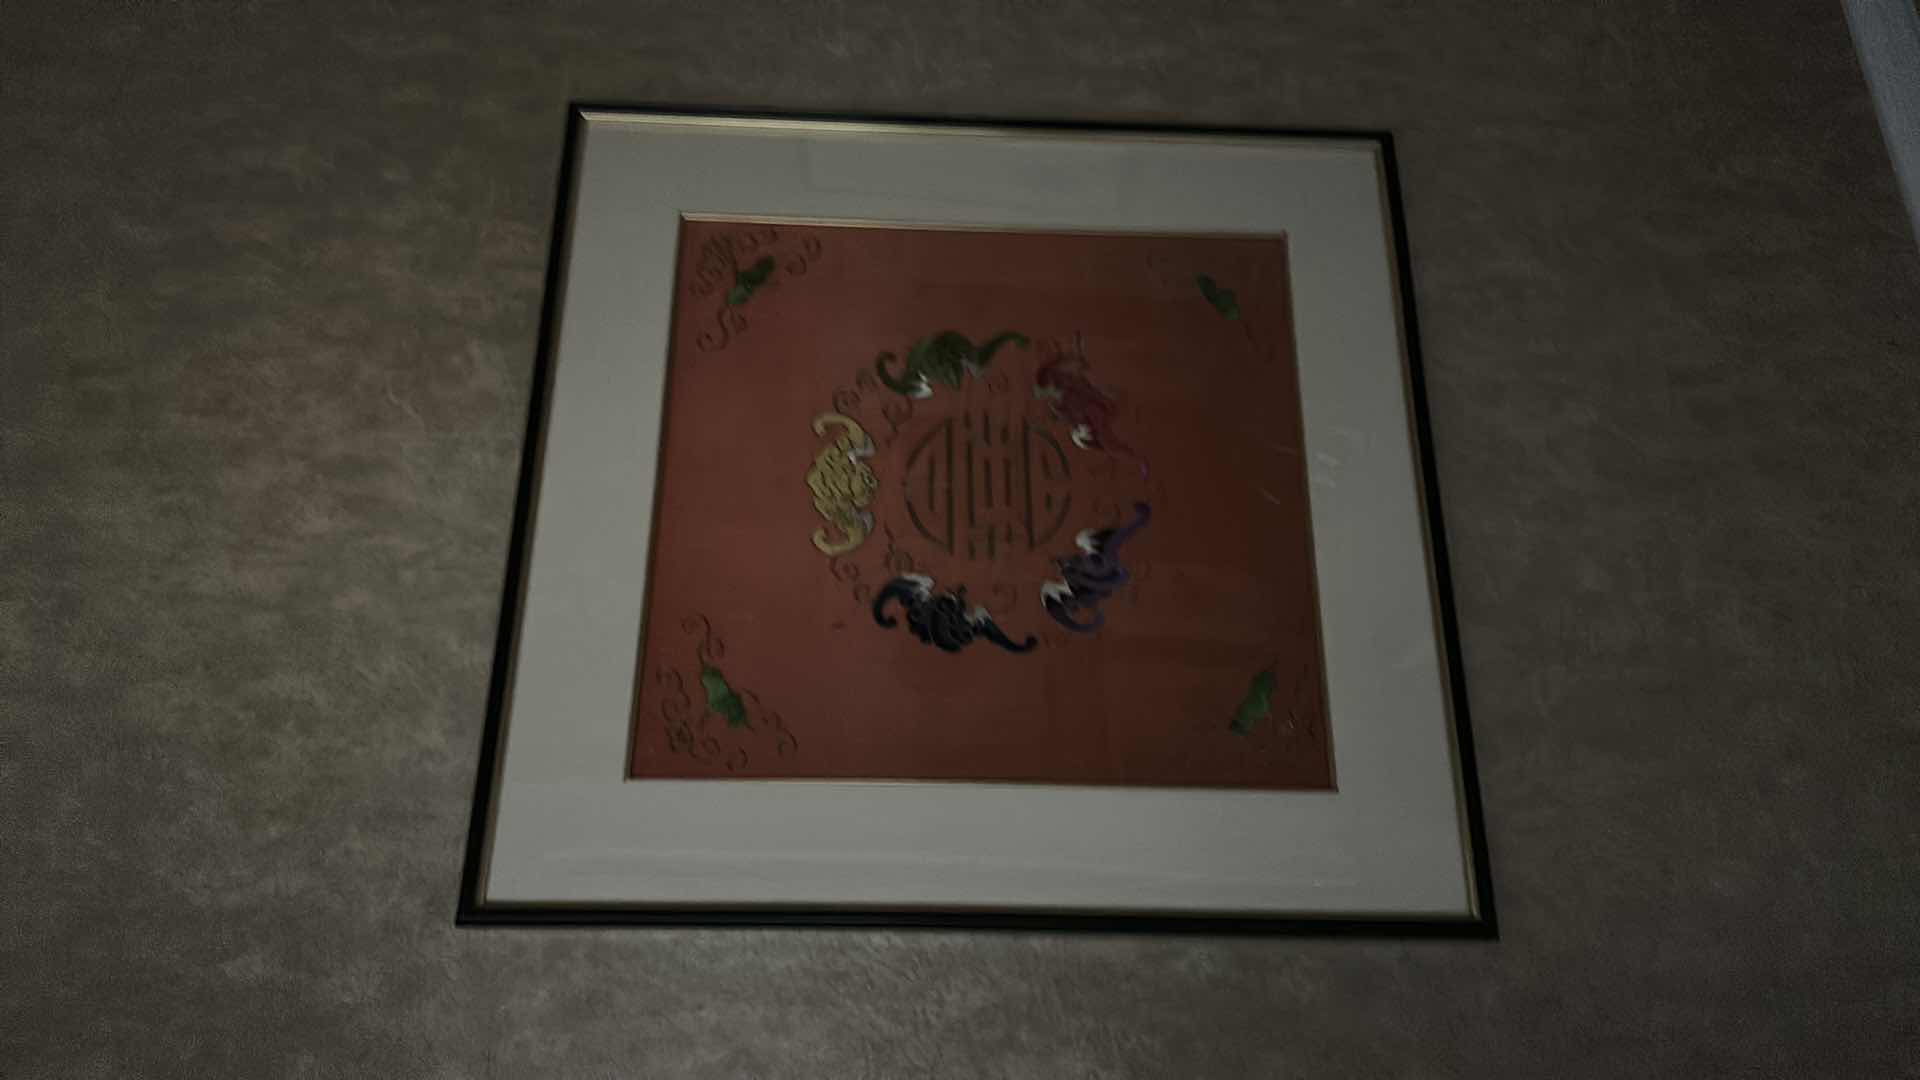 Photo 5 of ANTIQUE CHINESE TEXTILE FABRIC, SILK WITH SILK THREAD HAND EMBROIDERY ARTWORK FRAMED 18" X 18"